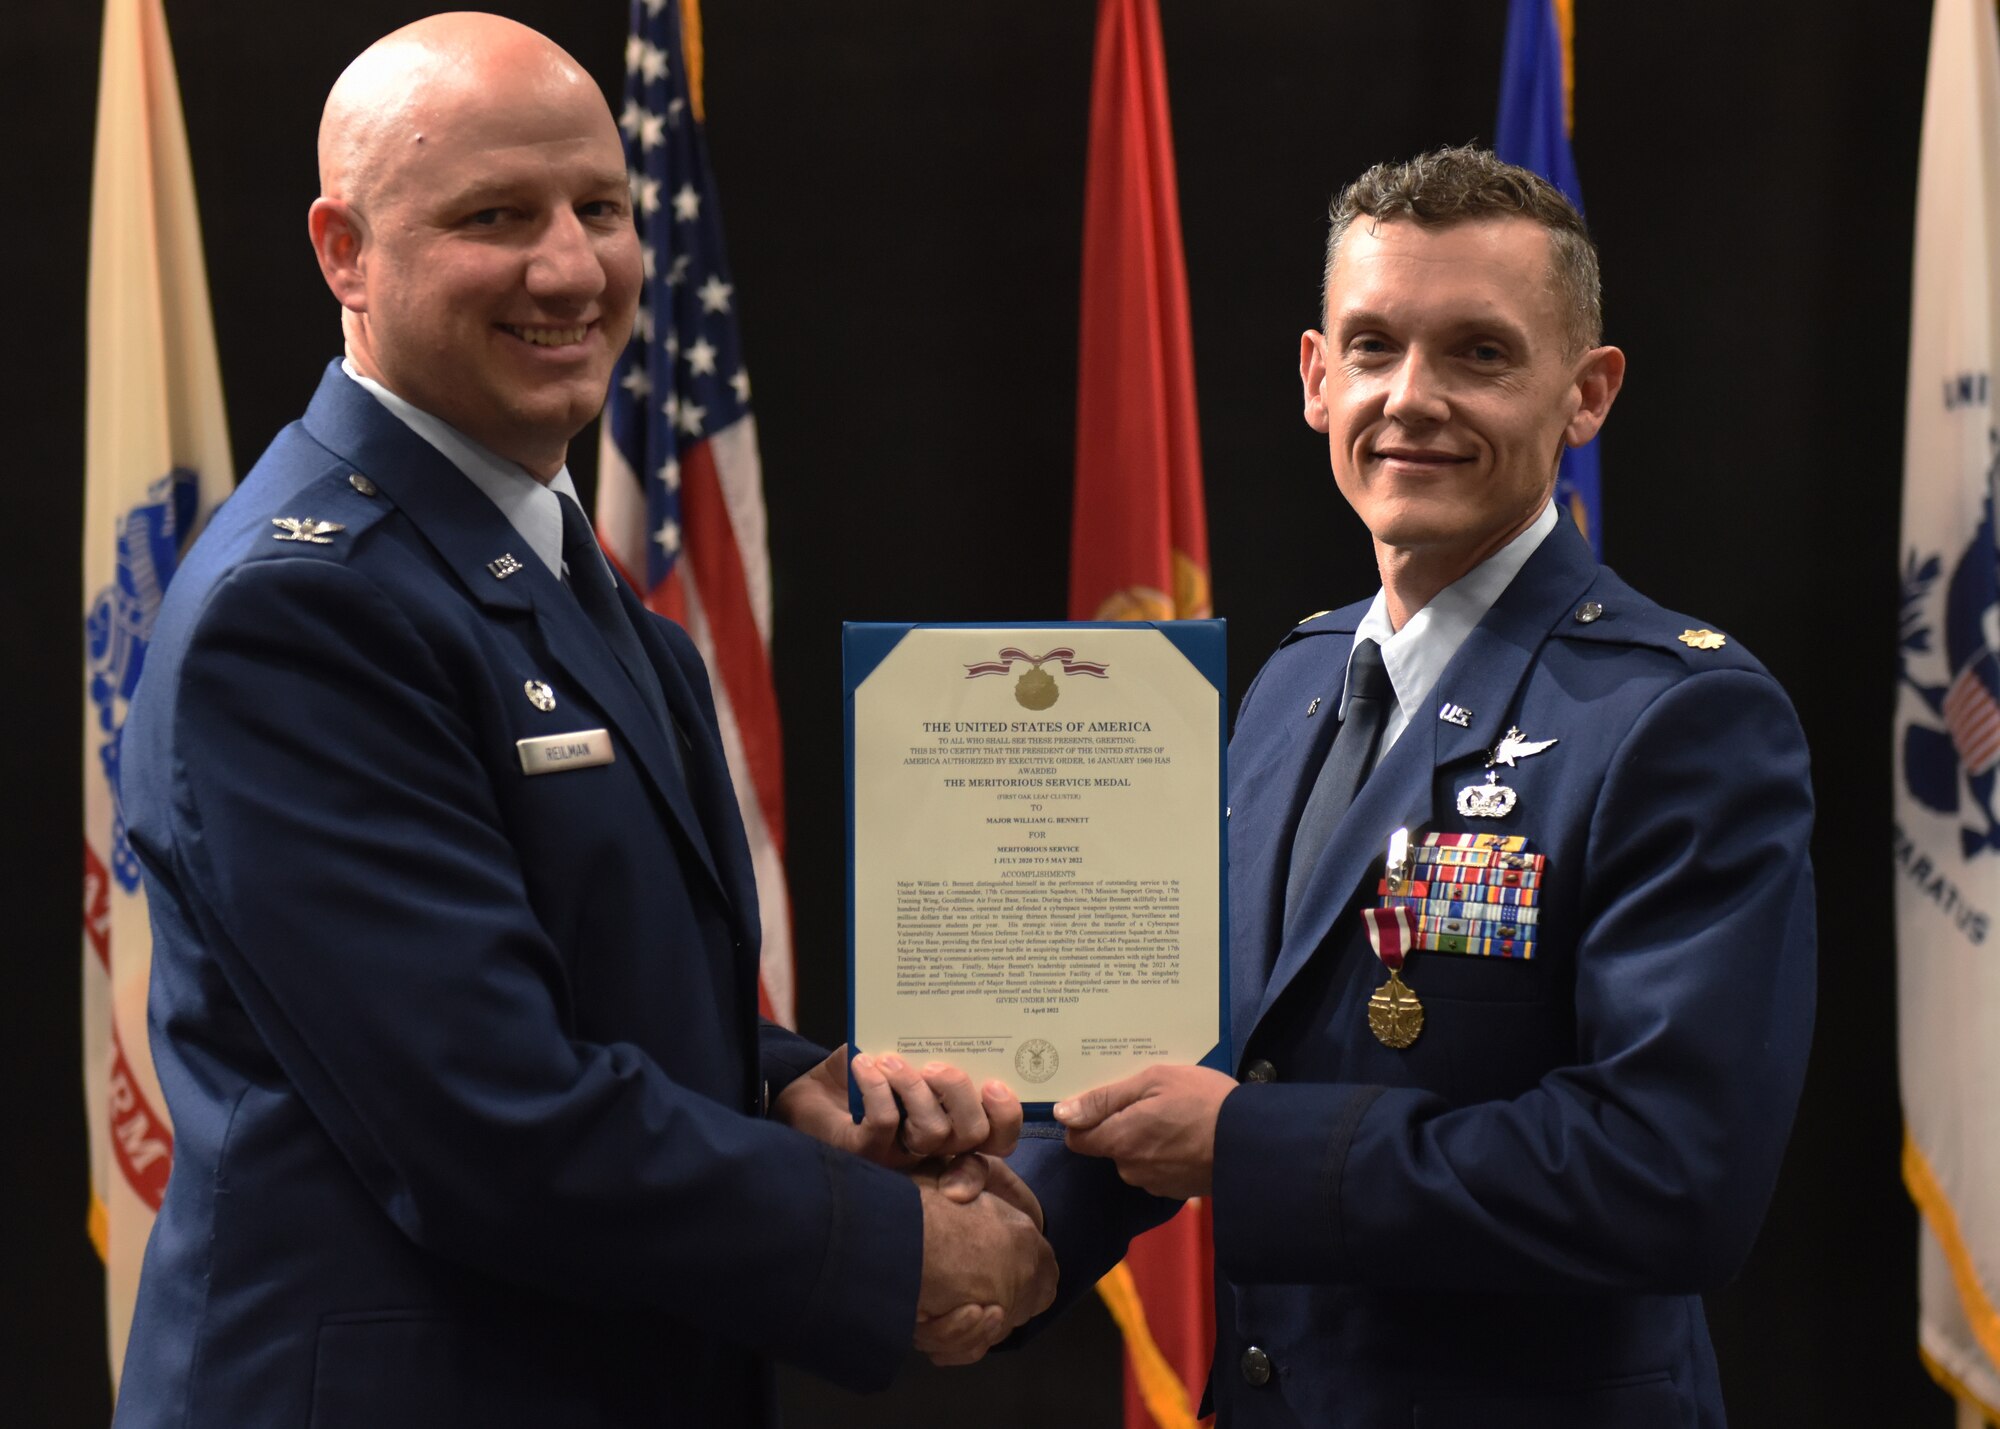 U.S. Air Force Maj. William Bennett (right), 17th Communications Squadron outgoing commander, receives the Meritorious Service Medal from Col. Matthew Reilman, 17th Training Wing commander, during the 17th CS change of command ceremony, at the Powell Event Center, Goodfellow Air Force Base, Texas, May 5, 2022. The 17th CS welcomed incoming commander, Maj. Dexter Webb from the 51st Fighter Wing in Osan Air Base, Republic of Korea. (U.S. Air Force photo by Airman 1st Class Zachary Heimbuch)